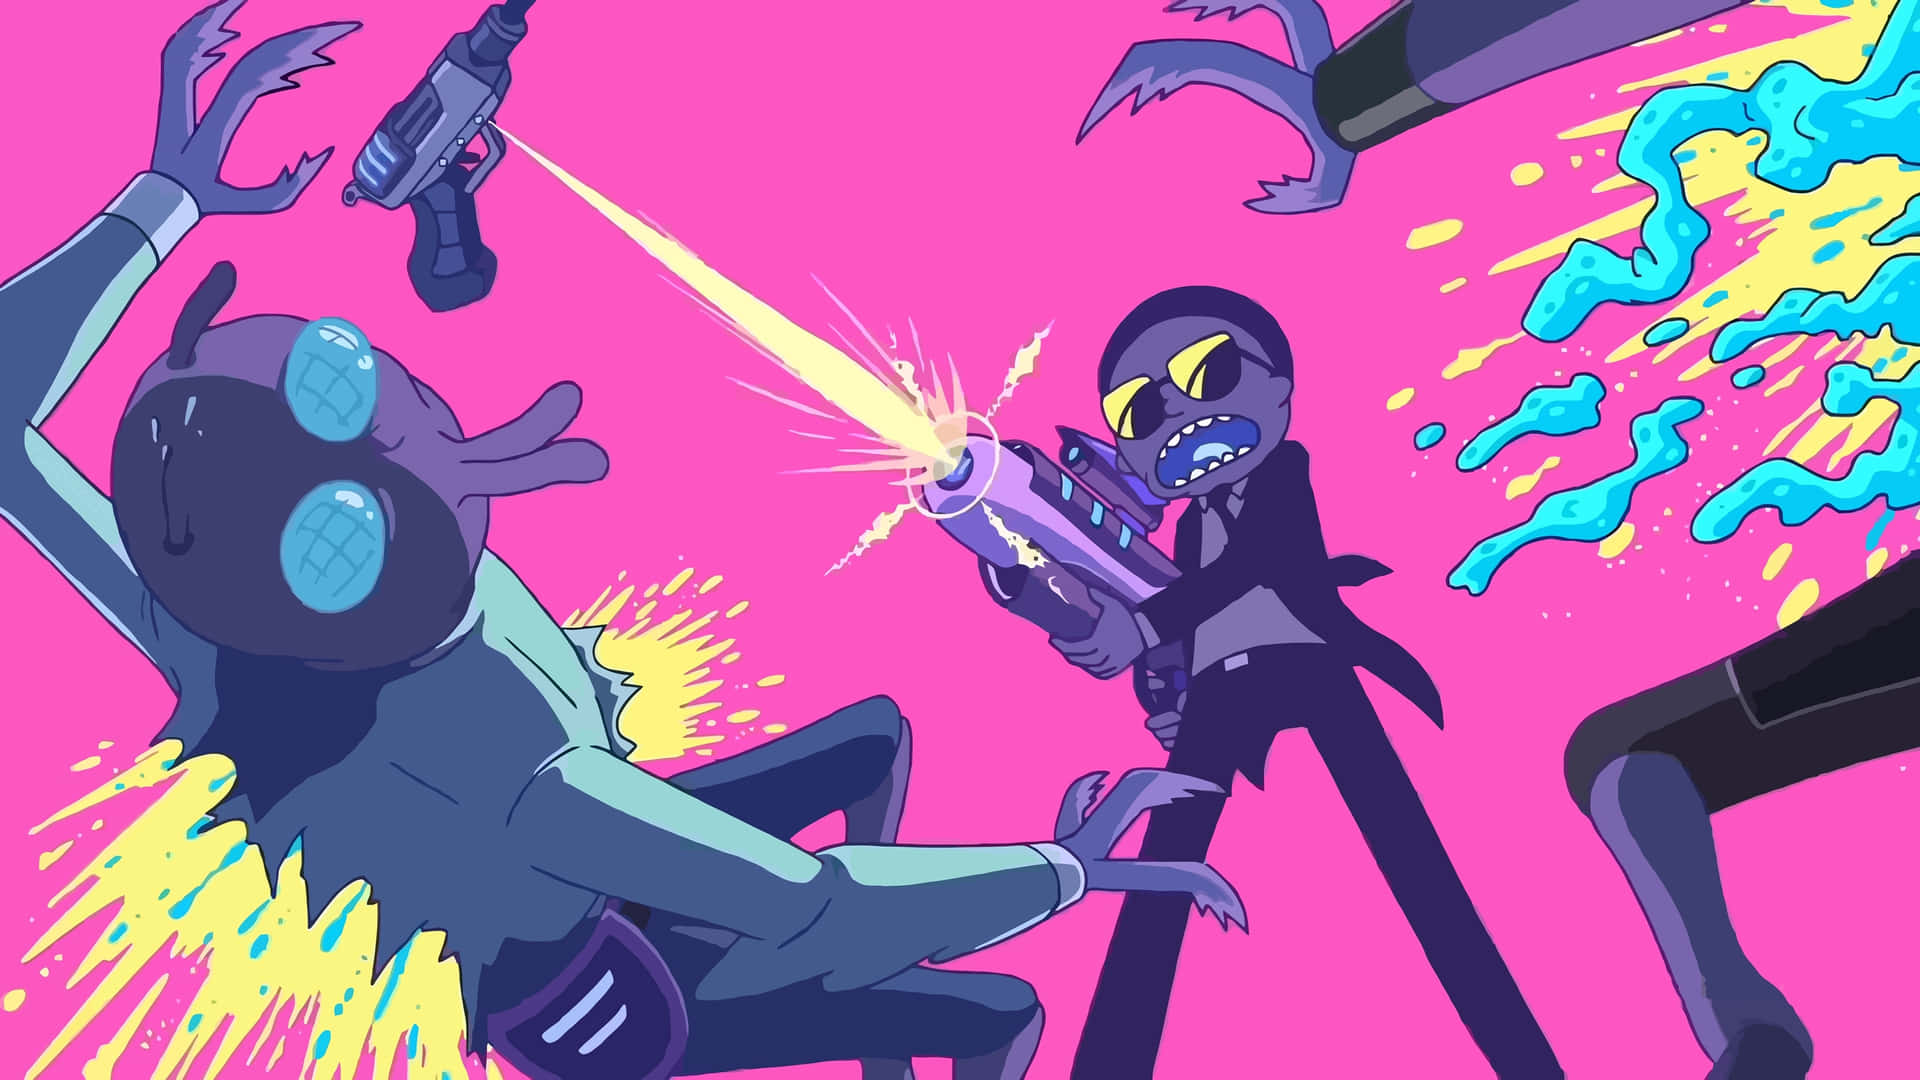 Embrace your inner Rick and Morty fan with this wild fan art Wallpaper